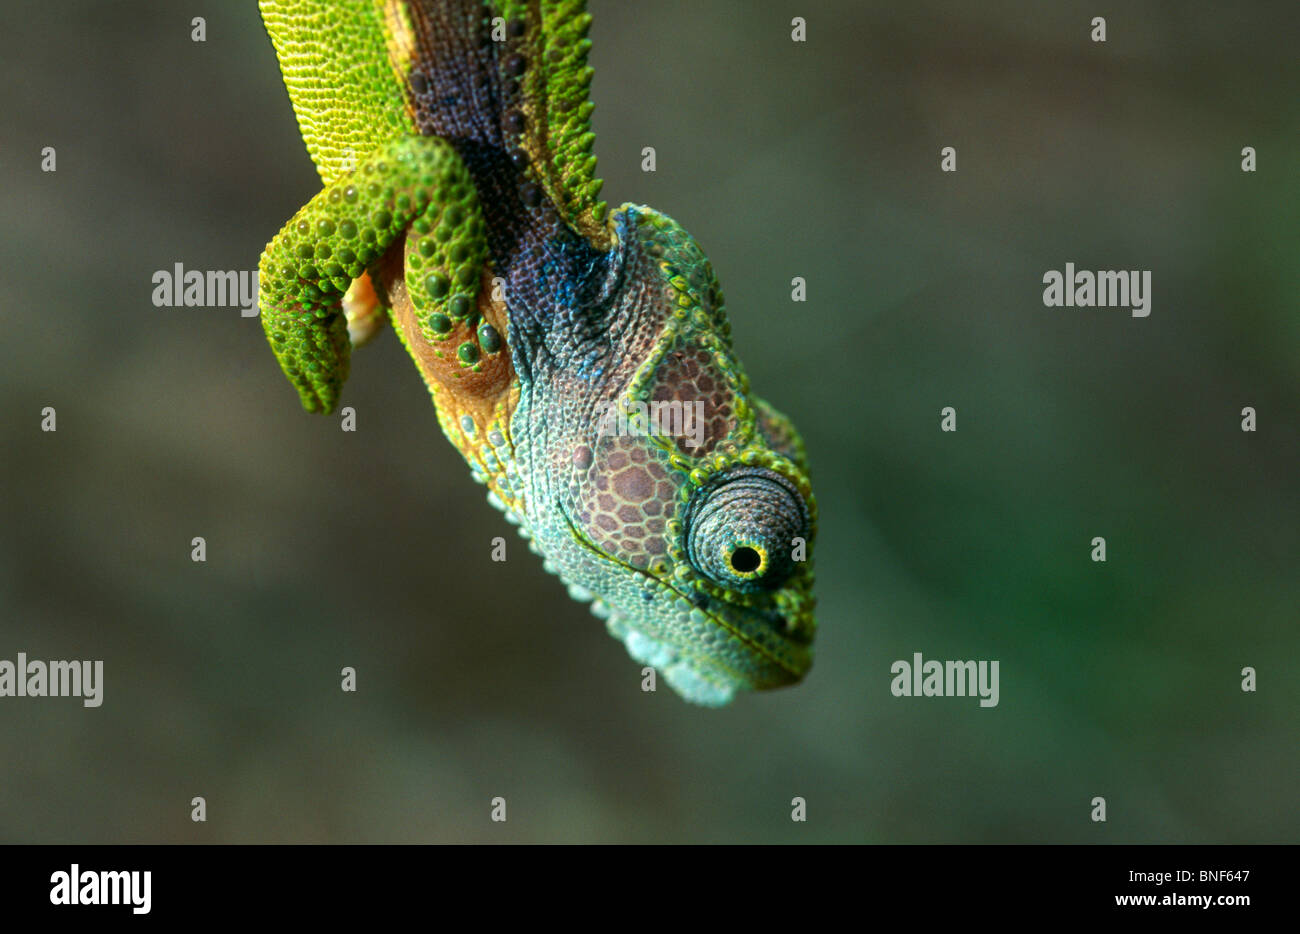 Close up view of a Southern Dwarf Chameleon (Bradypodian ventrale),Tsitsikamma National Park Eastern Cape Province South Africa Stock Photo